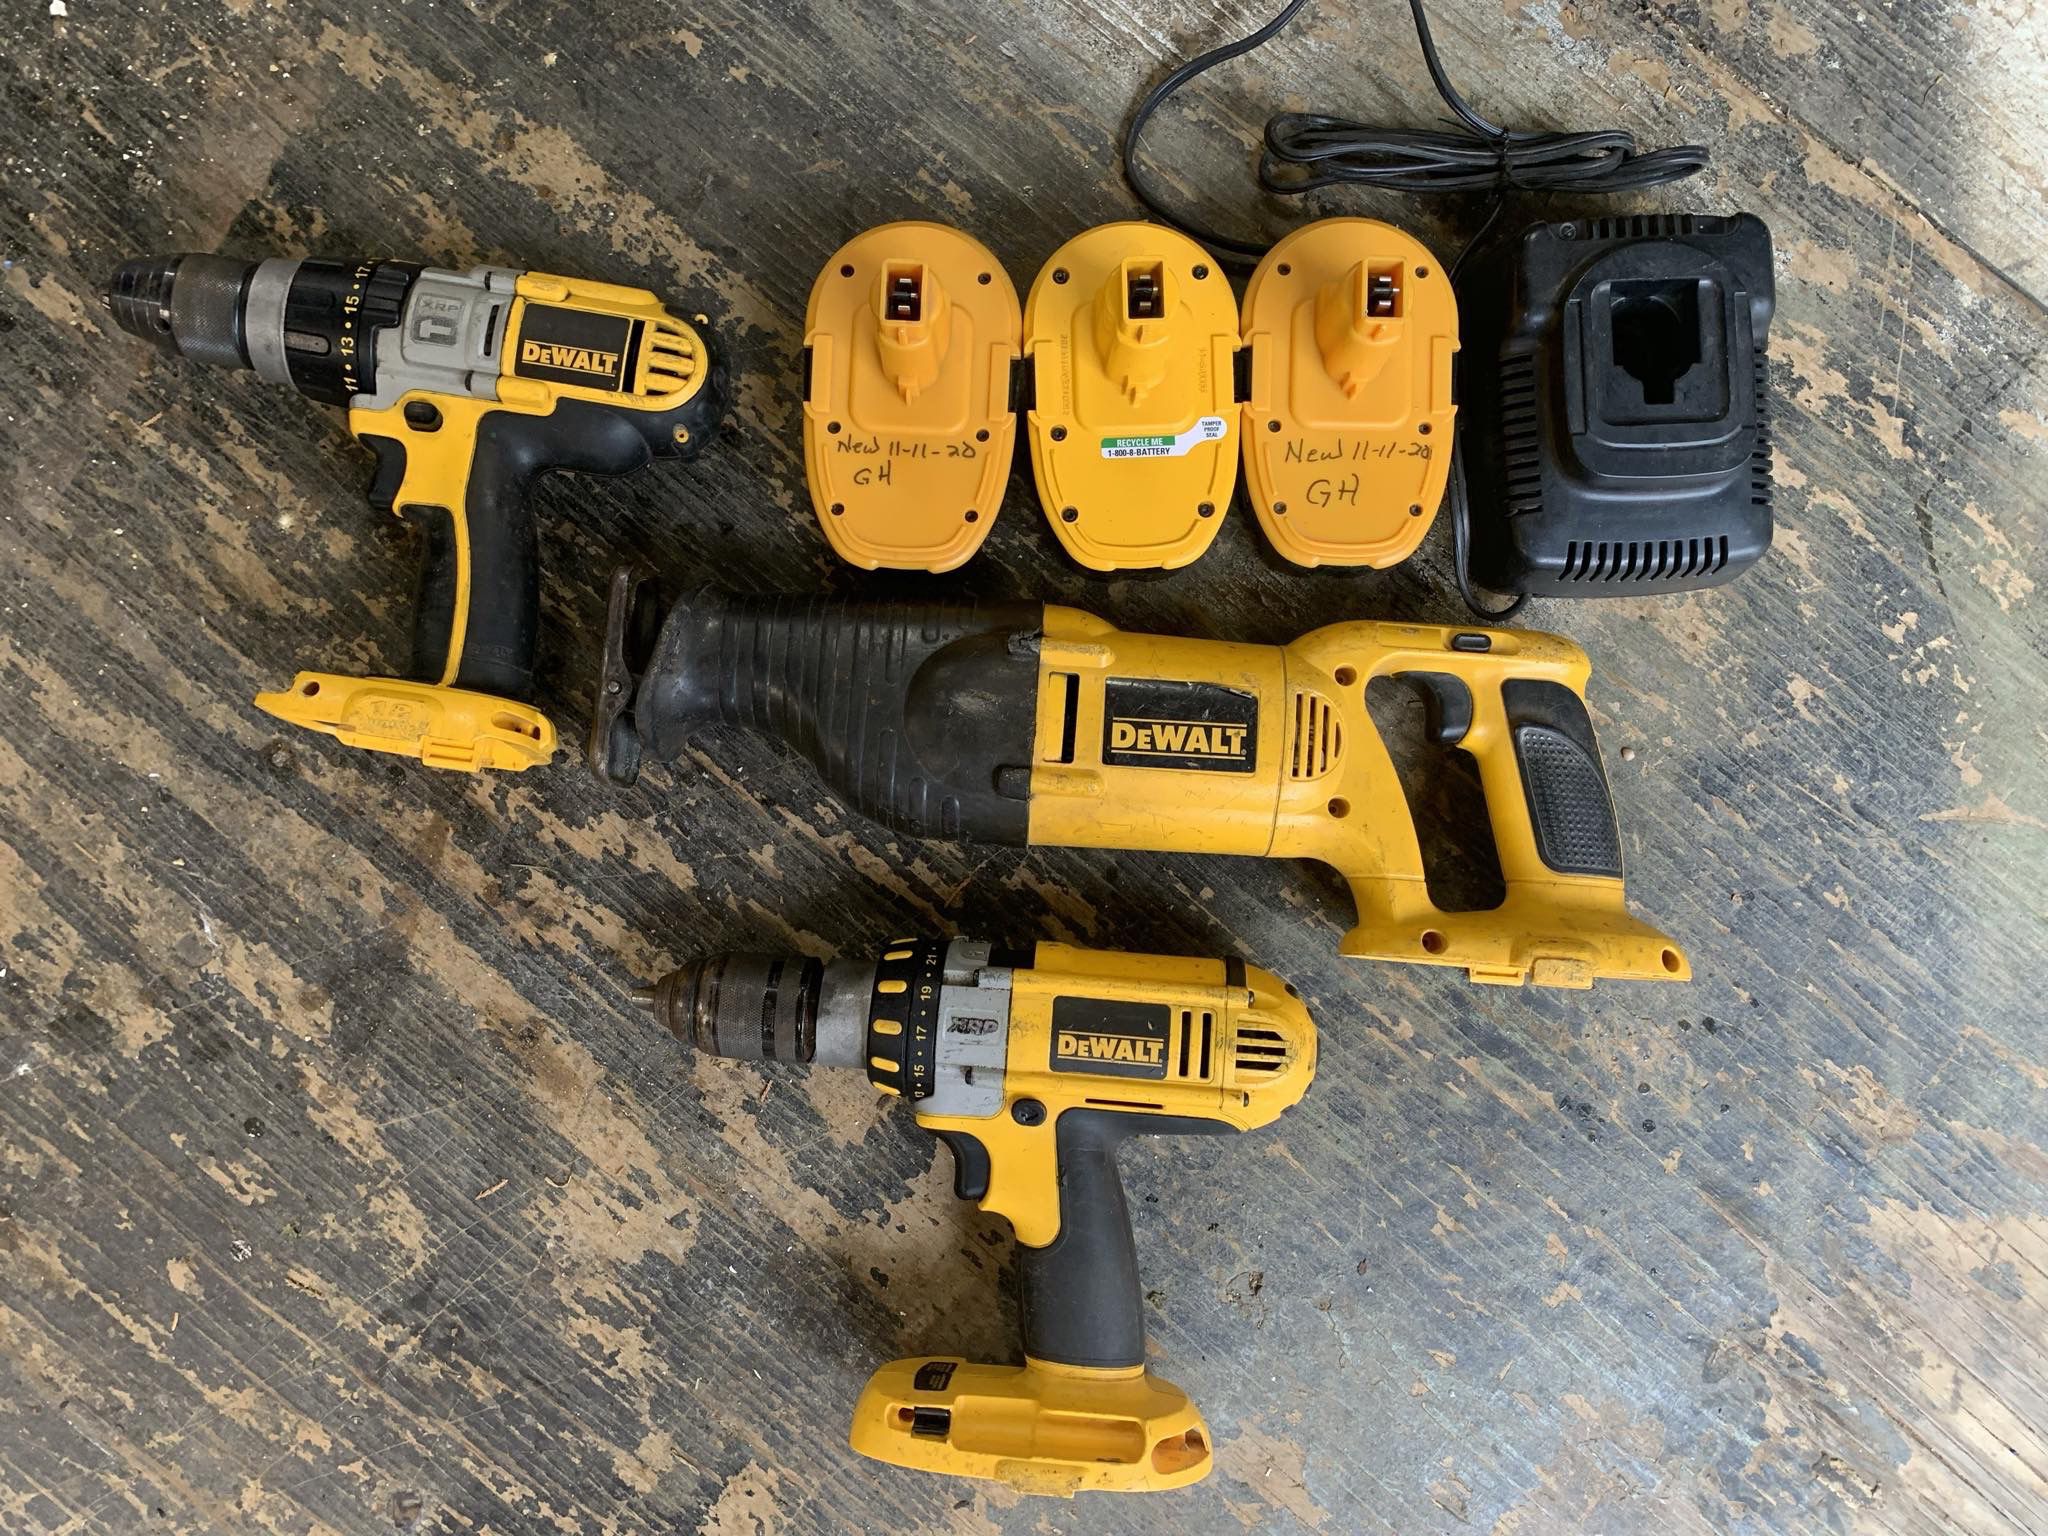 Dewalt hammer drill sawzall and 3 batteries and a charger. 